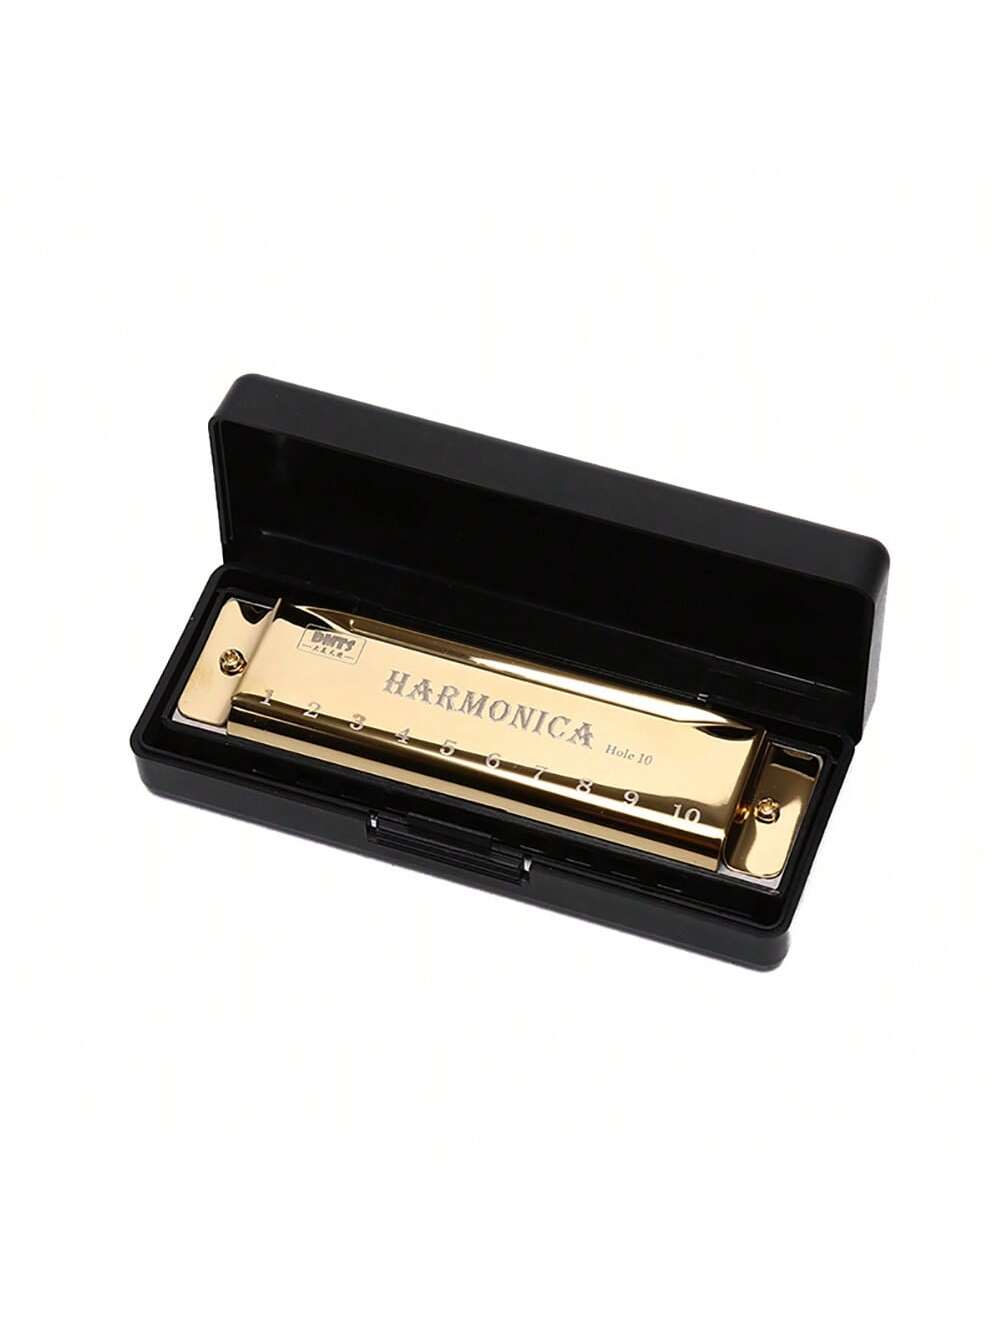 1pc Golden 10 Holes Harmonica, Copper 10 Holes Blues Harmonica For Students, Kids, Early Education Music Instrument Toy